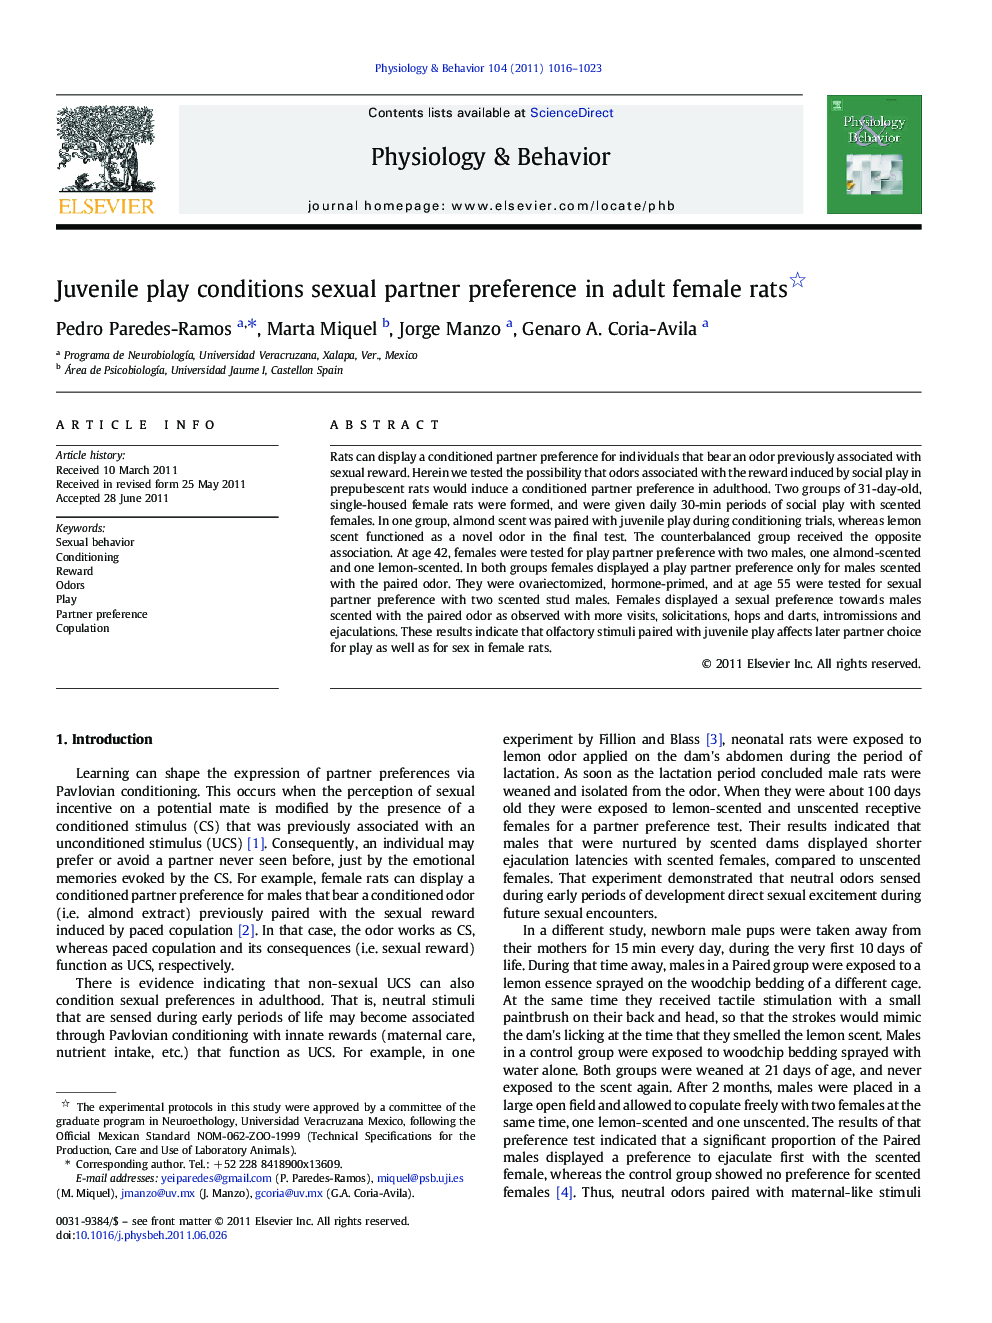 Juvenile play conditions sexual partner preference in adult female rats